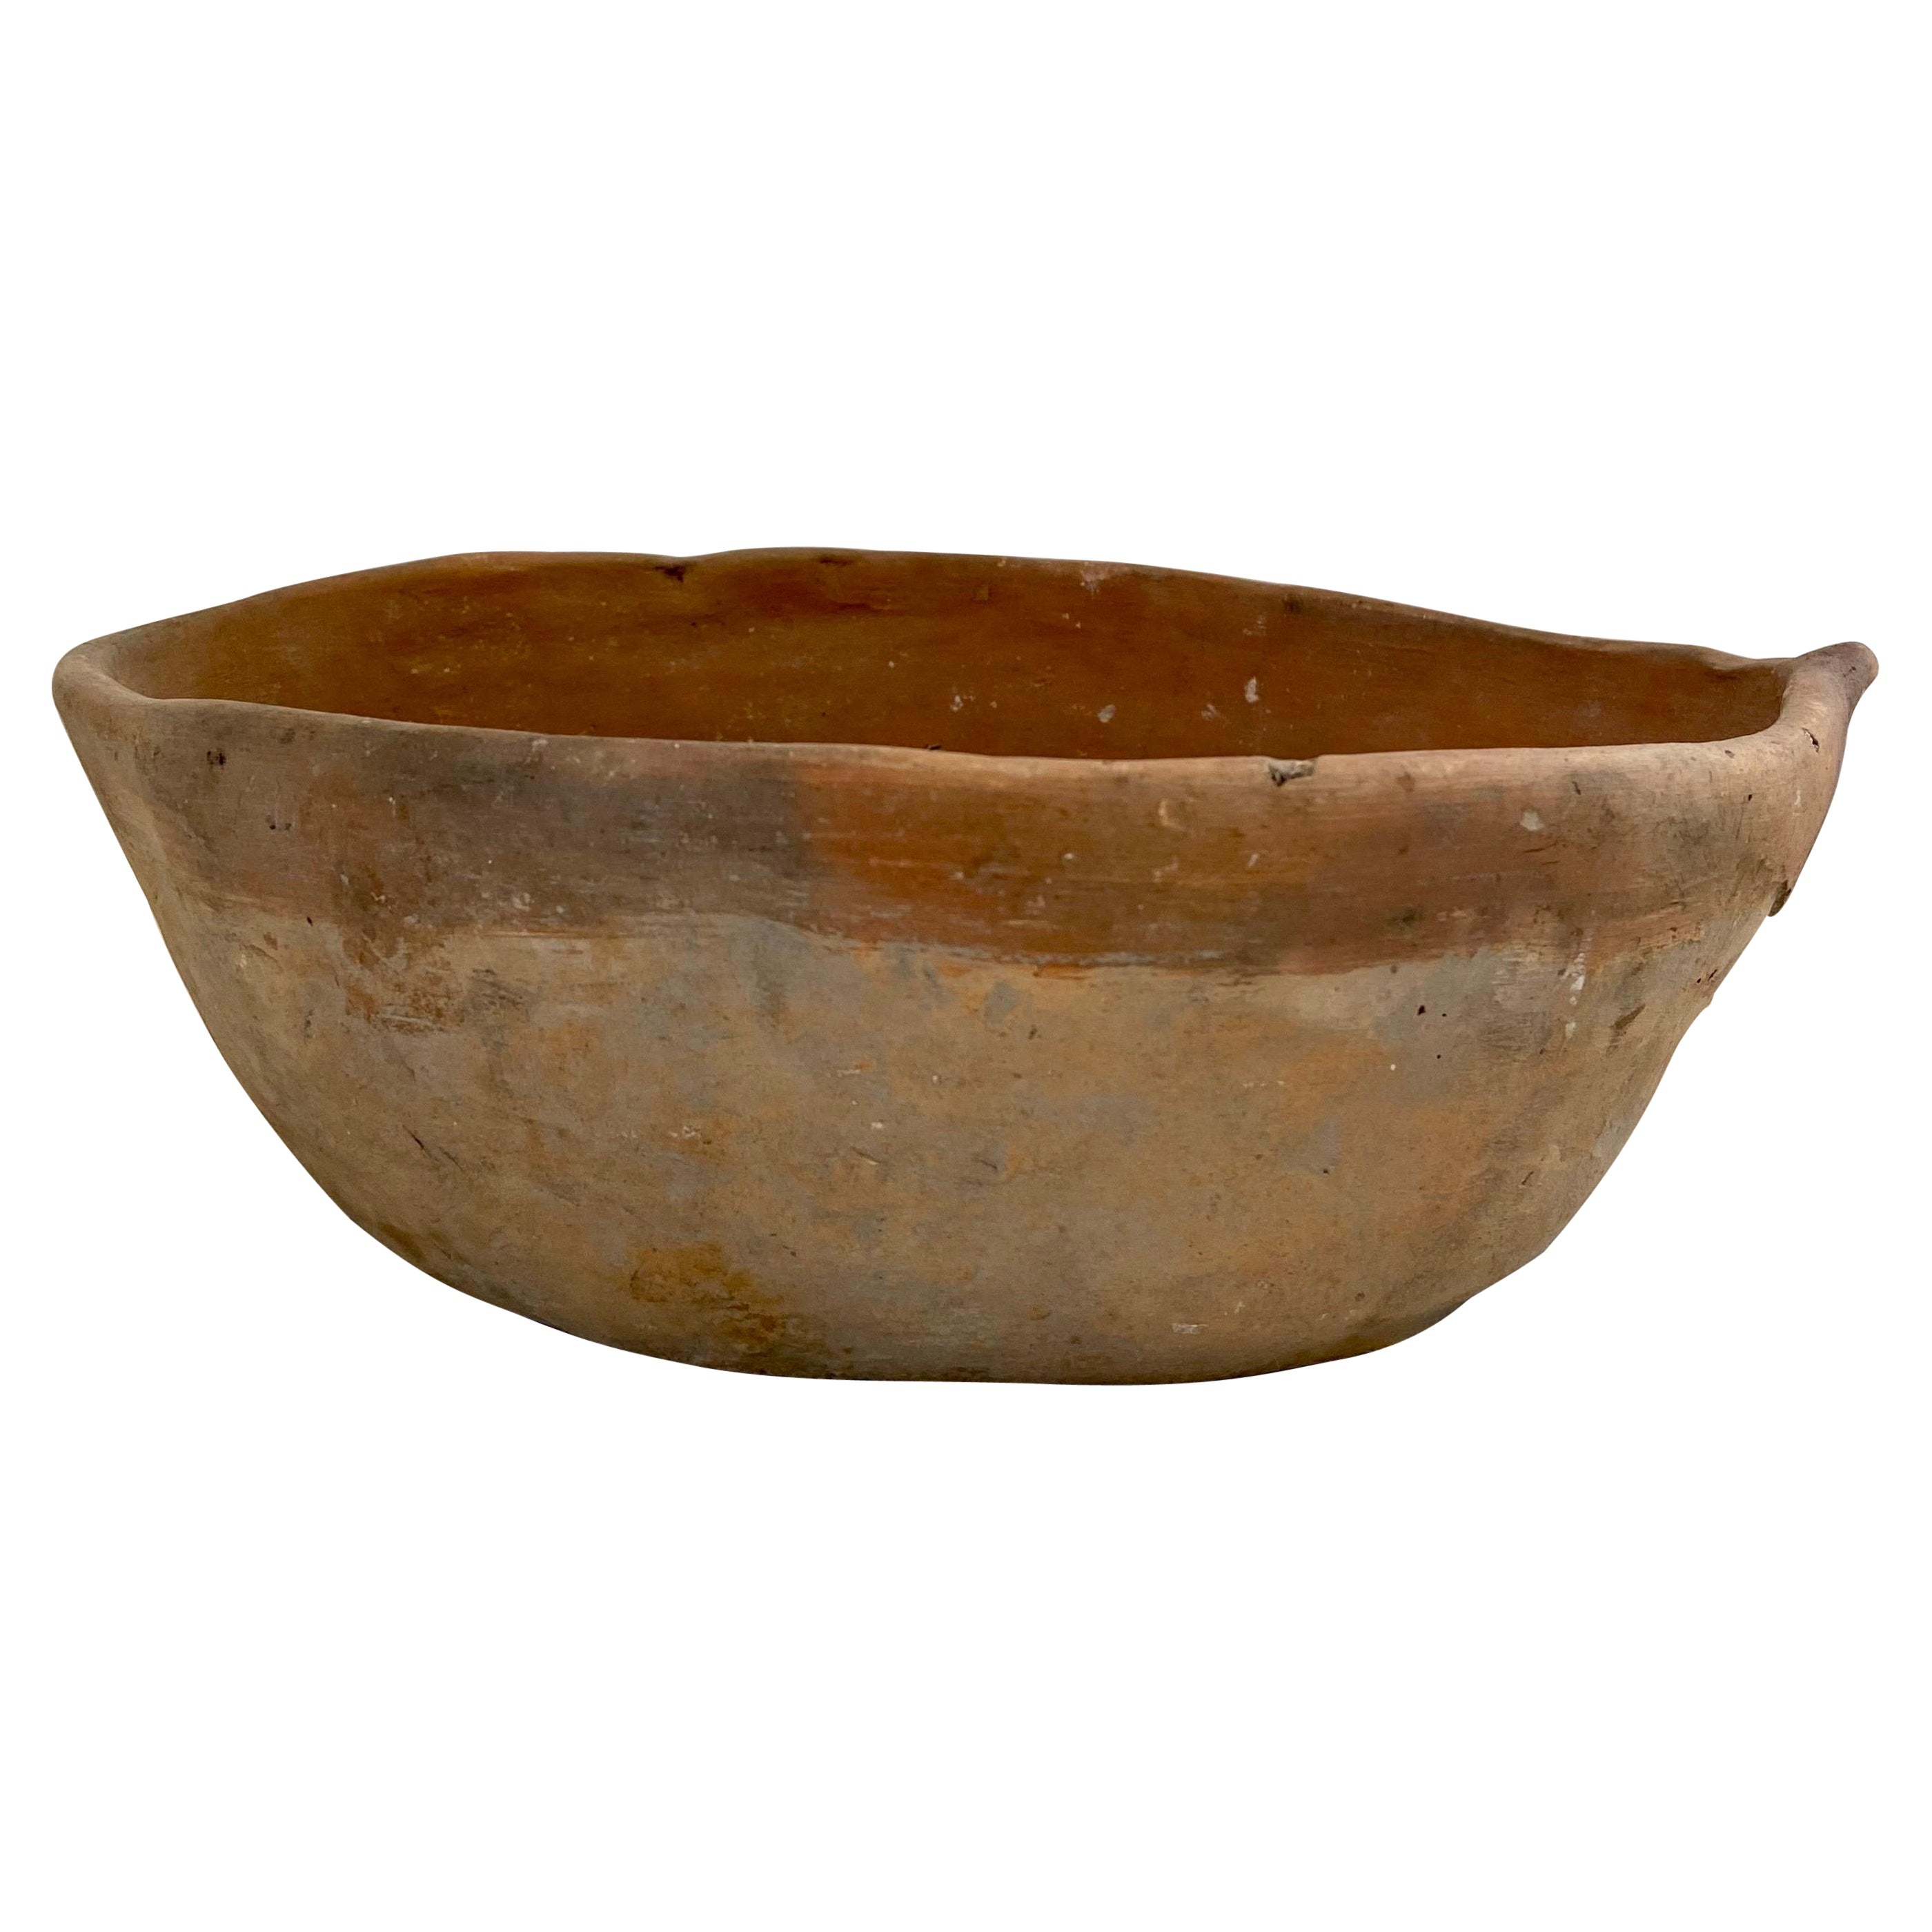 Mid-20th Century Terracotta Bowl from Mexico For Sale